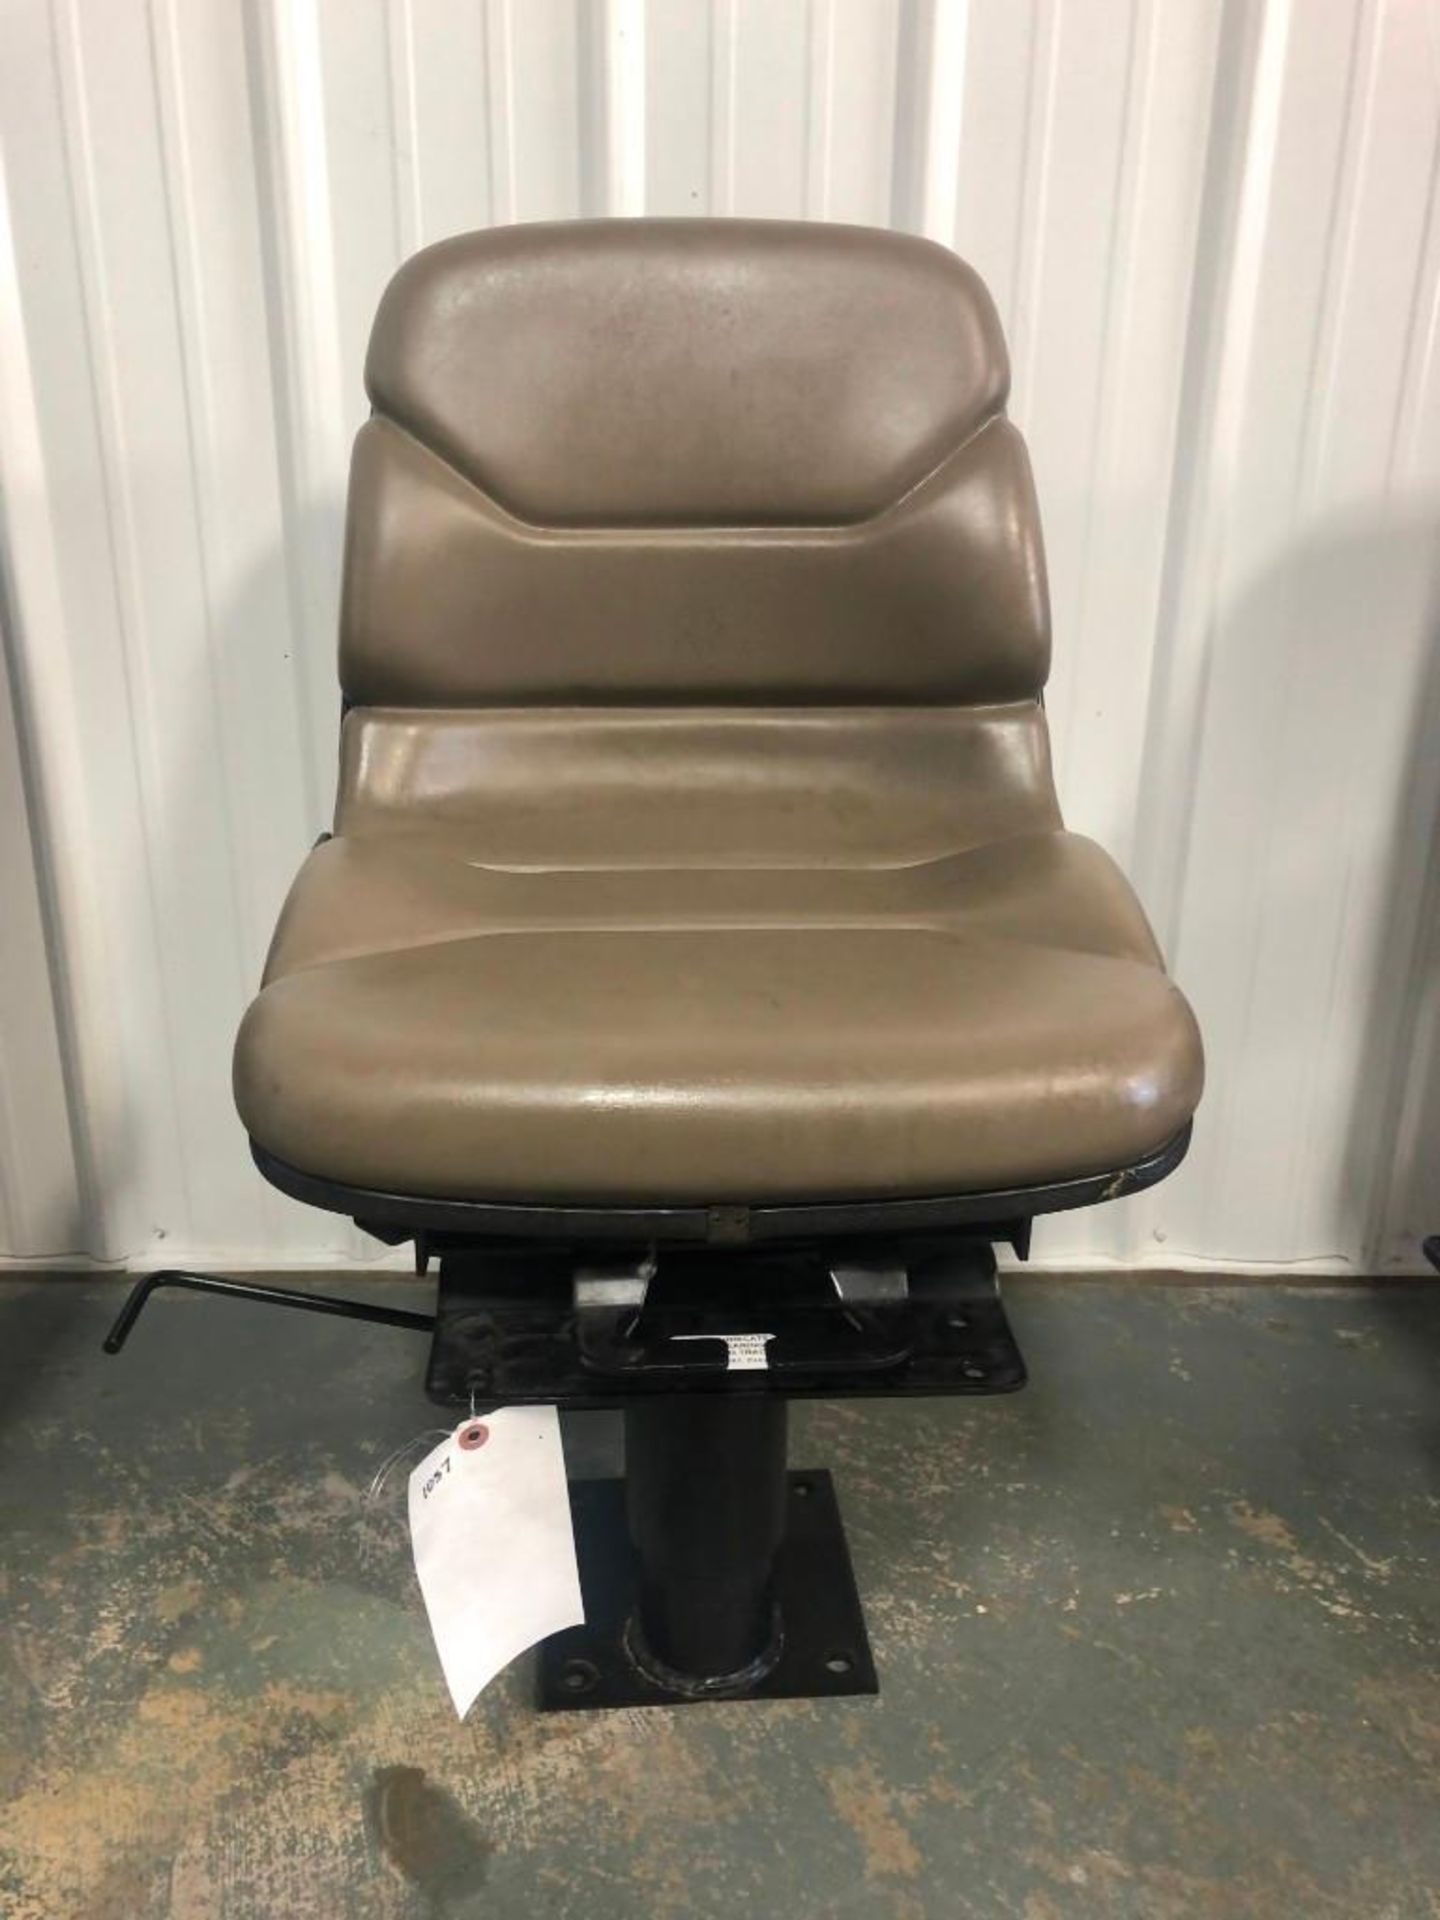 Backhoe Seat. Located at 301 E Henry Street, Mt. Pleasant, IA 52641.